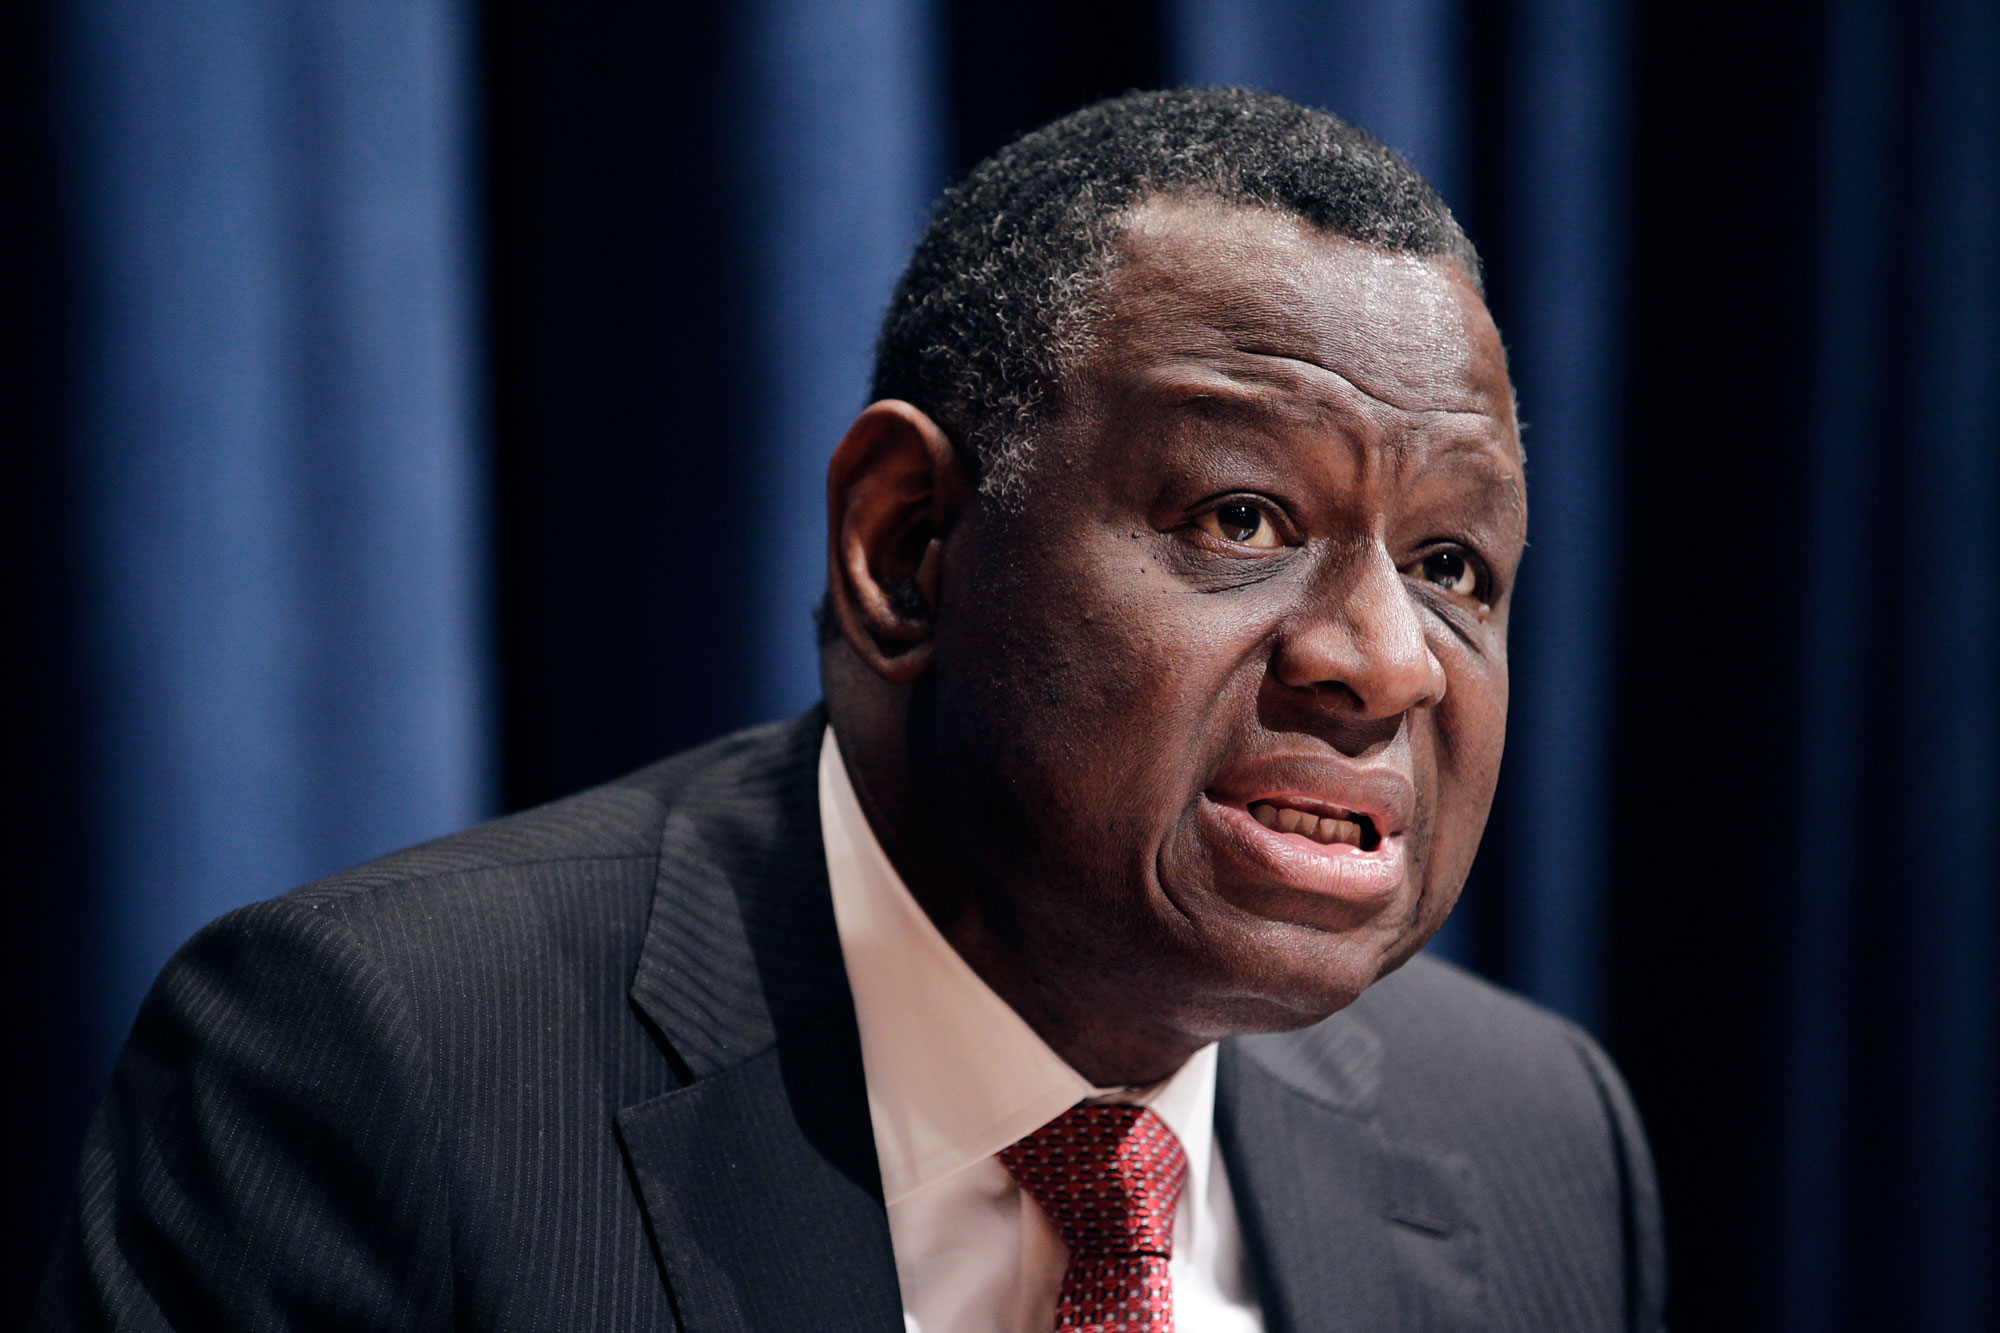 UNFPA Executive Director, Babatunde Osotimehin dies at 68